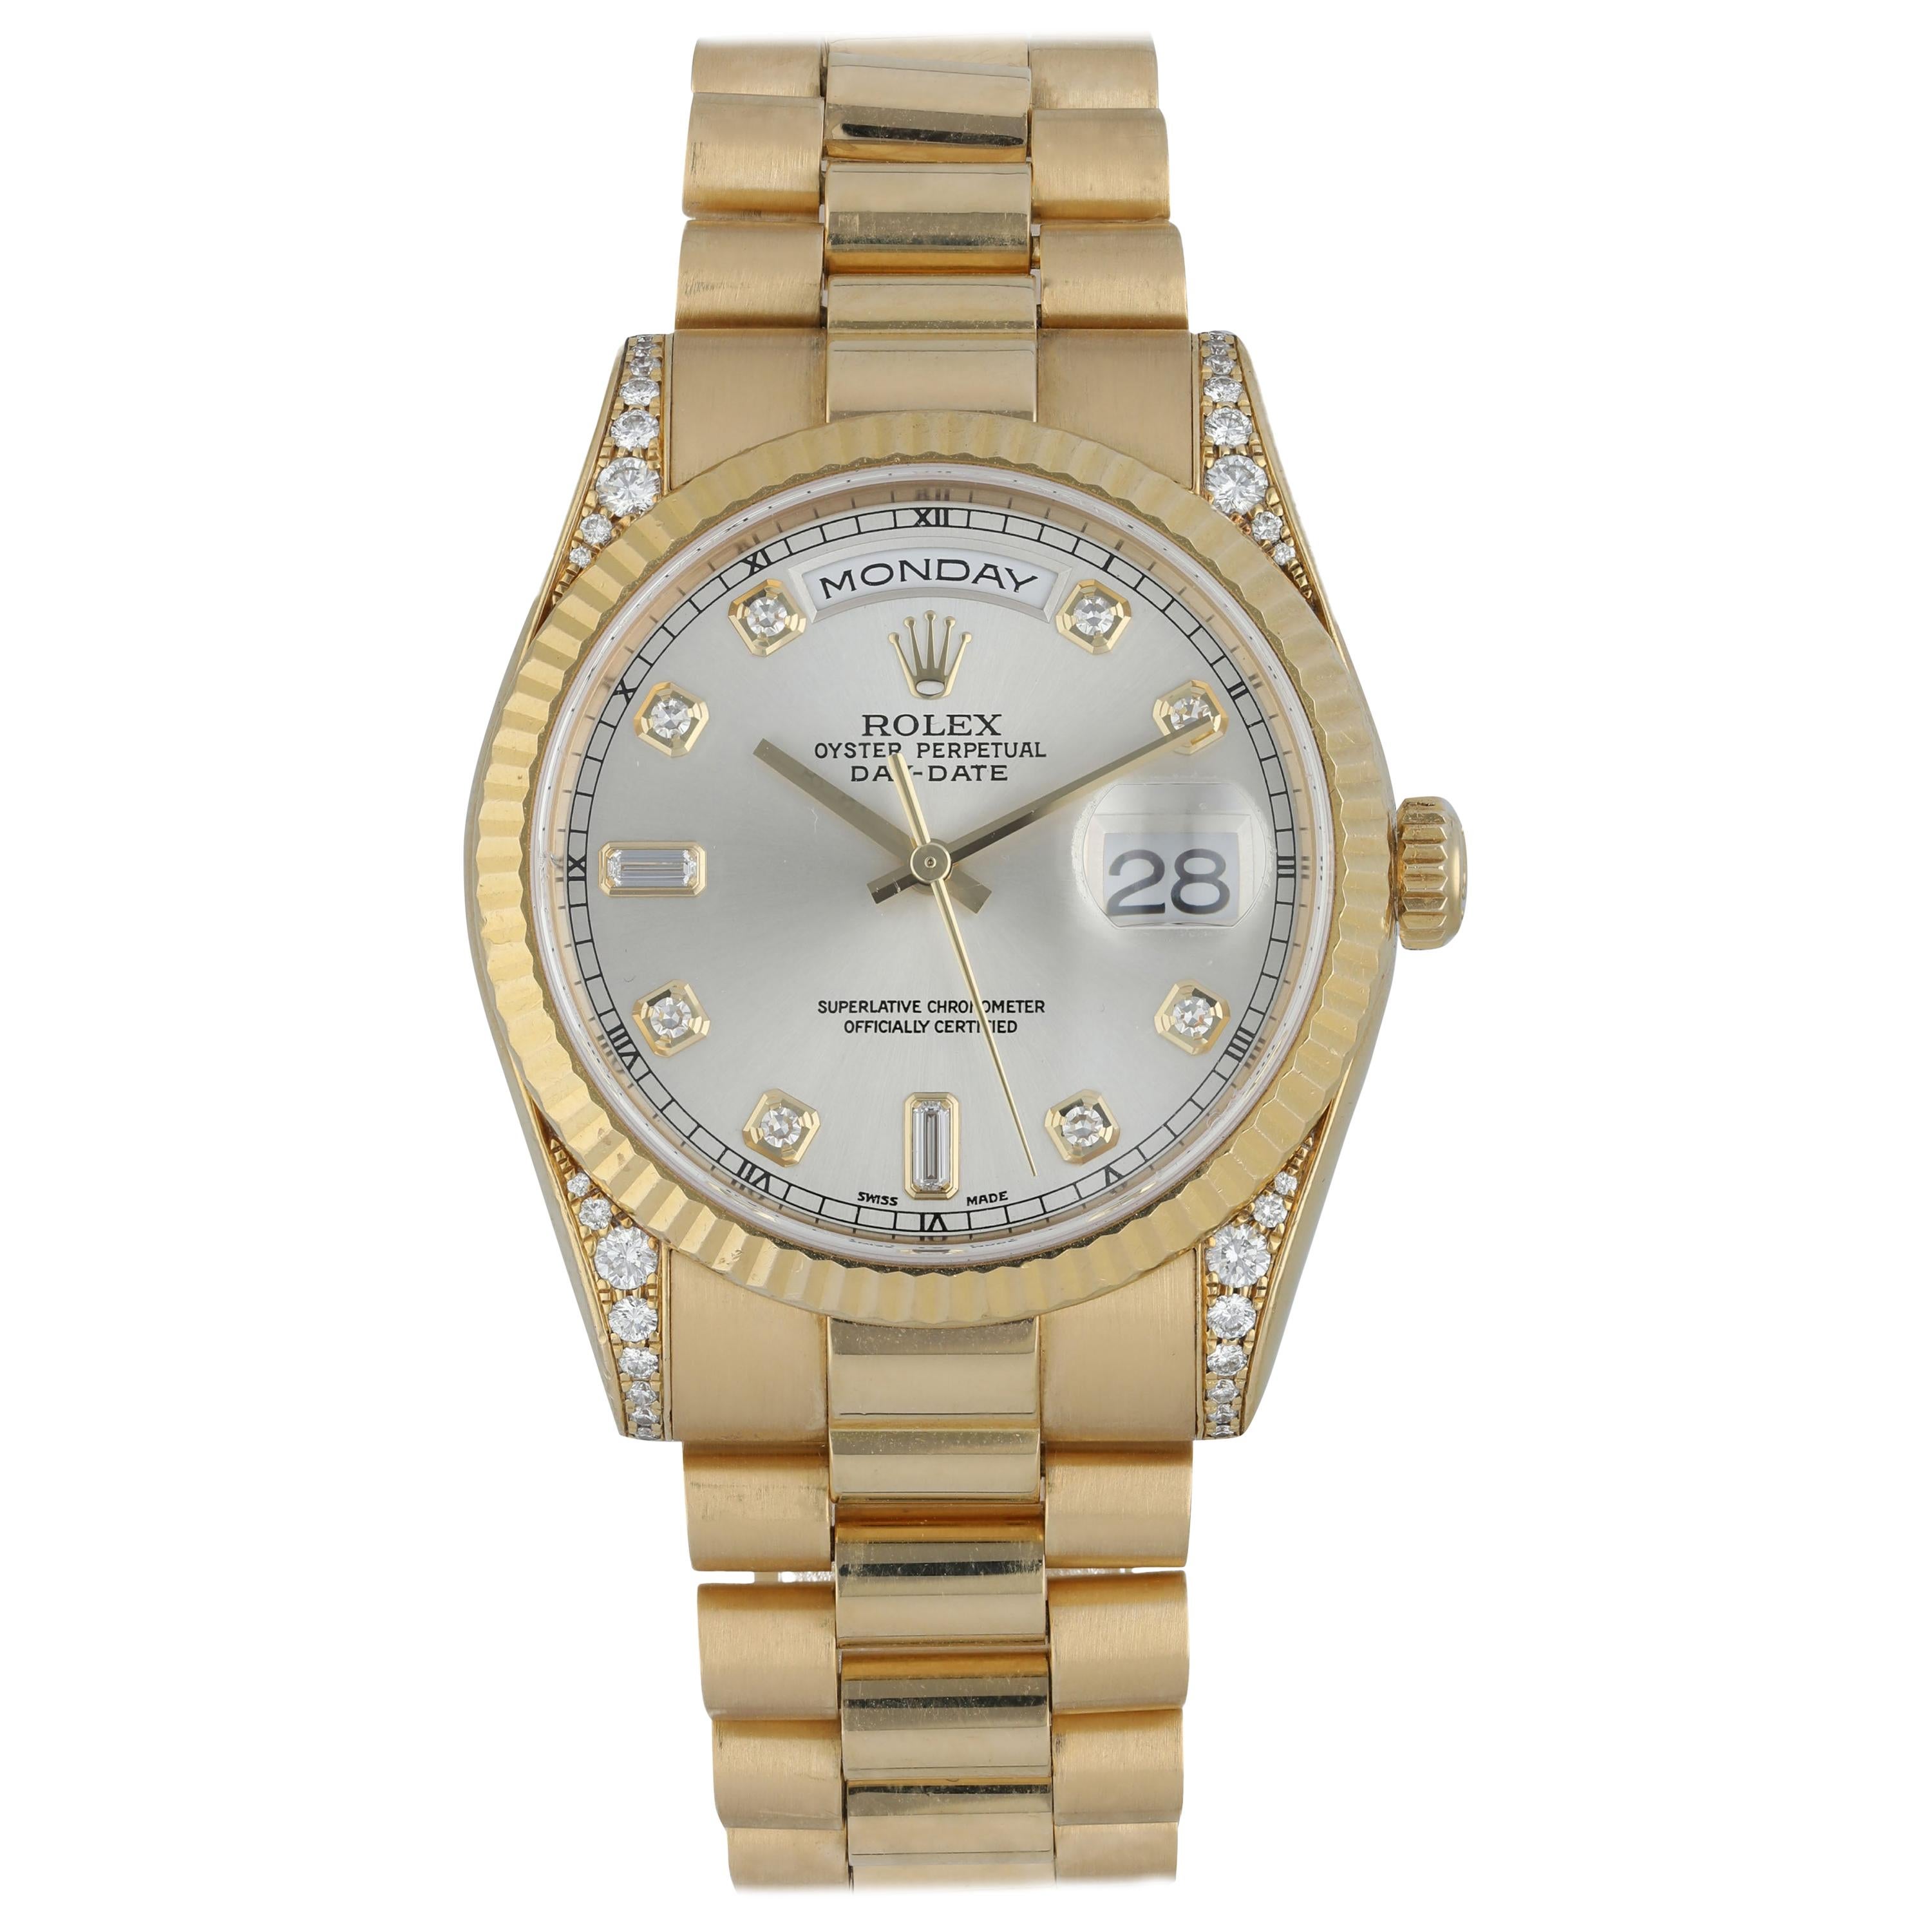 Rolex Day Date President 118338 Diamond Dial / Case Men's Watch For Sale